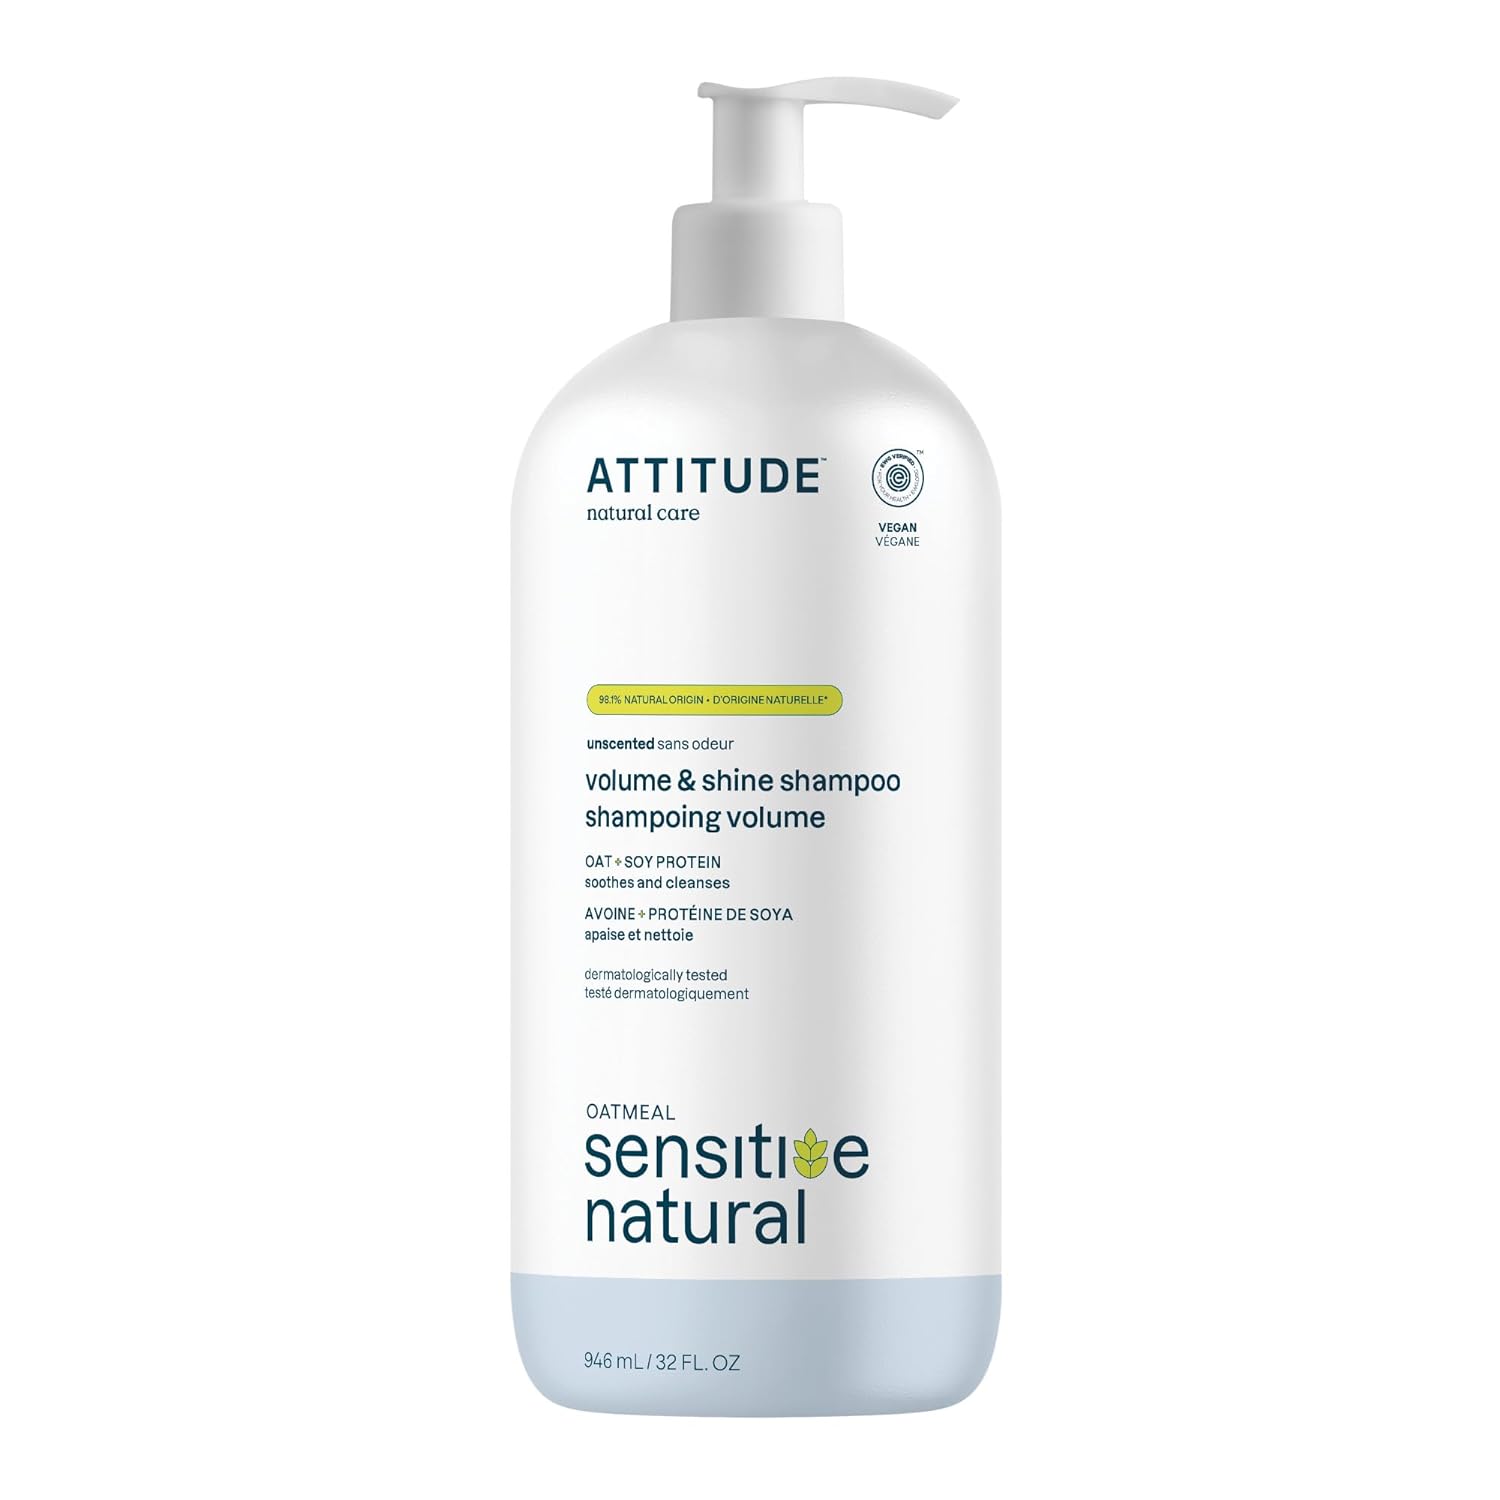 ATTITUDE Volume and Shine Hair Shampoo for Sensitive Dry Scalp, EWG Verified, Soothing Oat, For Thin Hair, Naturally Dervied Ingredients, Vegan and Plant-Based, Unscented, 32 Fl Oz